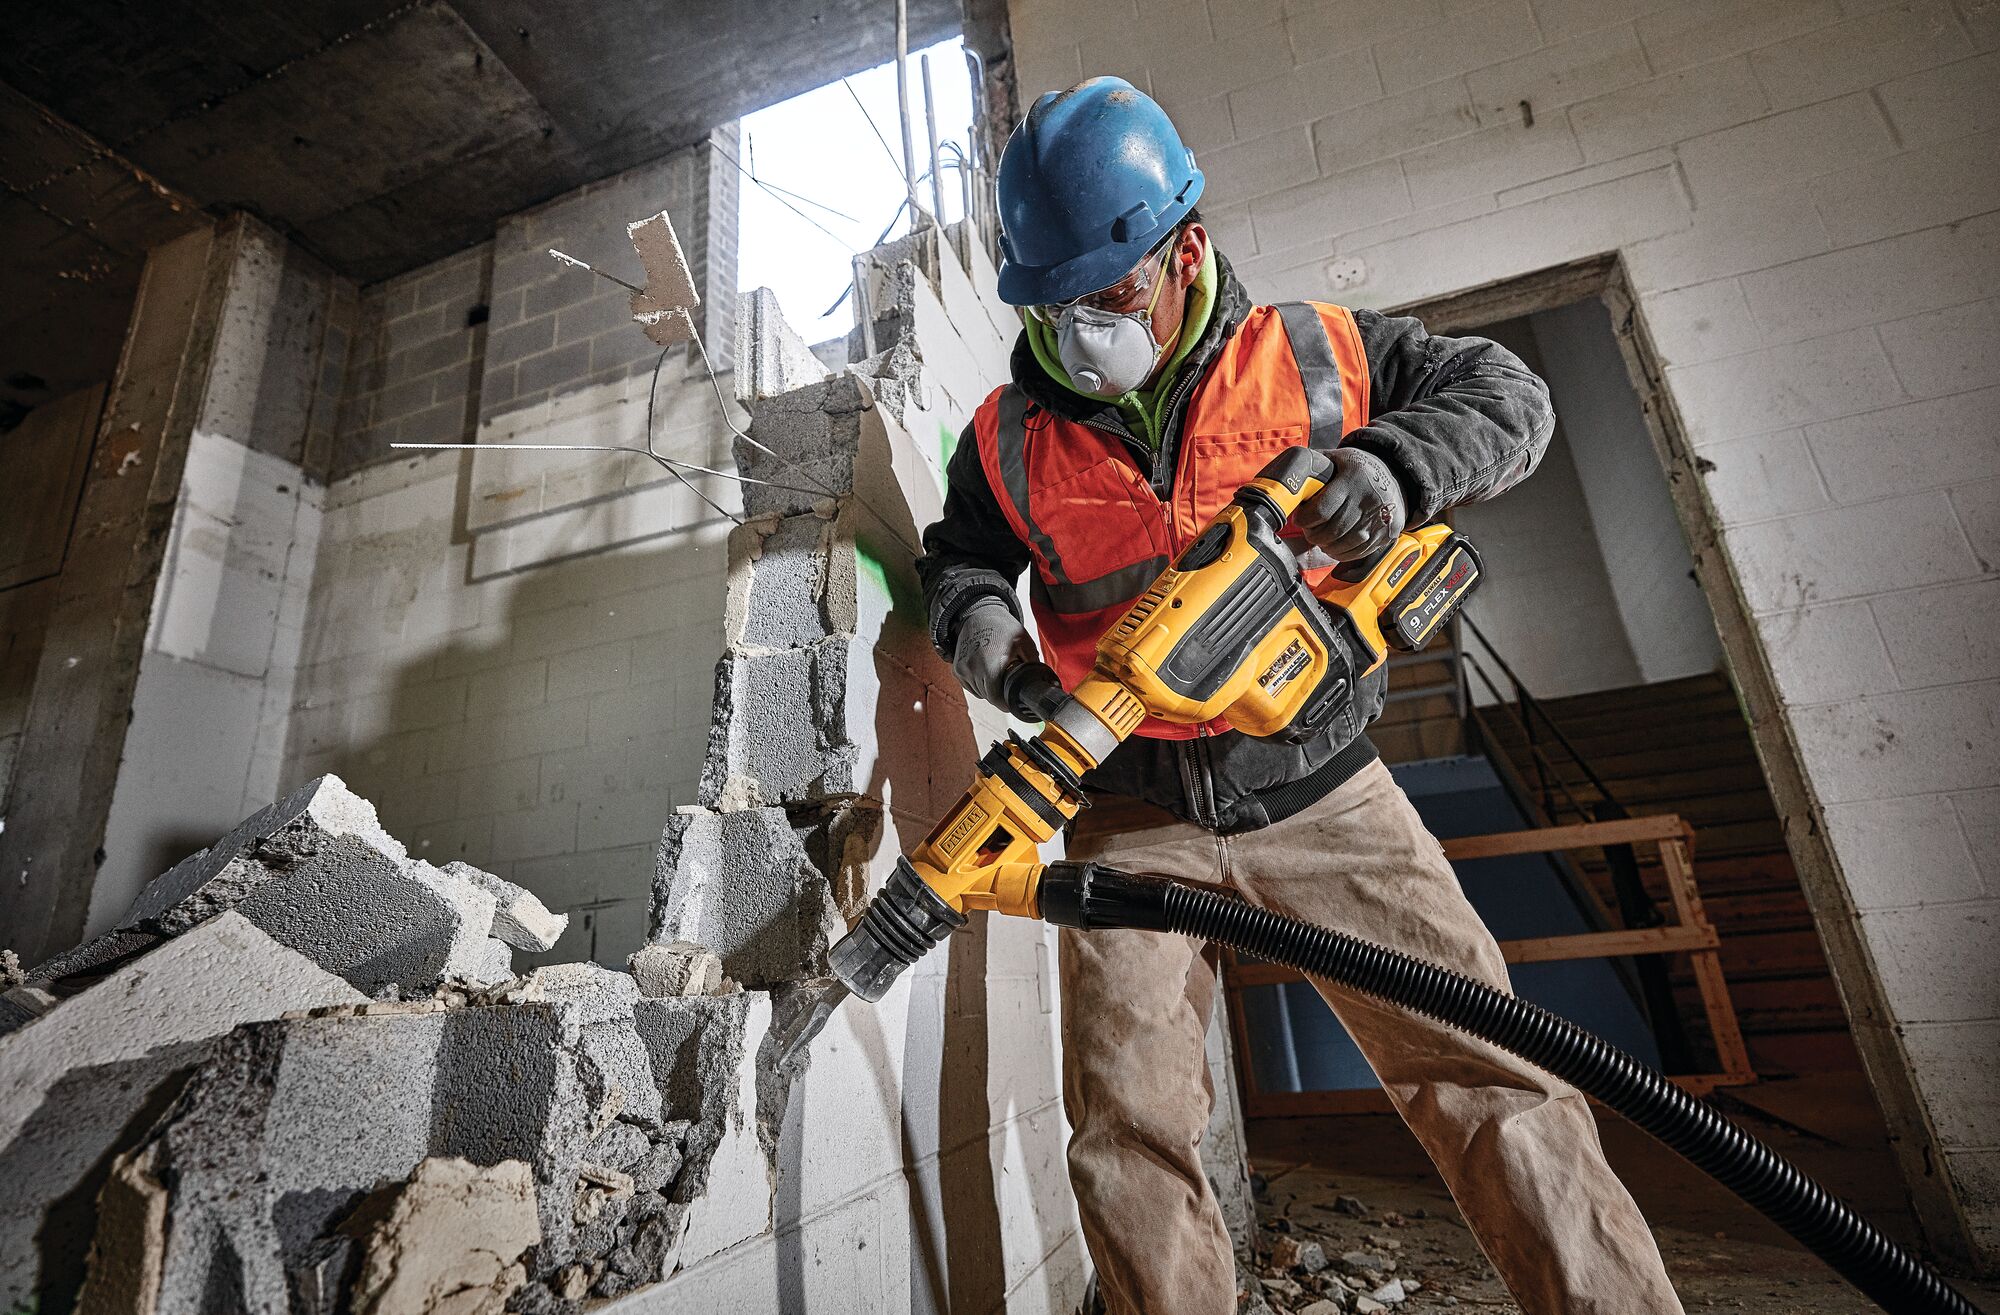 SDS MAX Brushless combination rotary hammer being used by a person